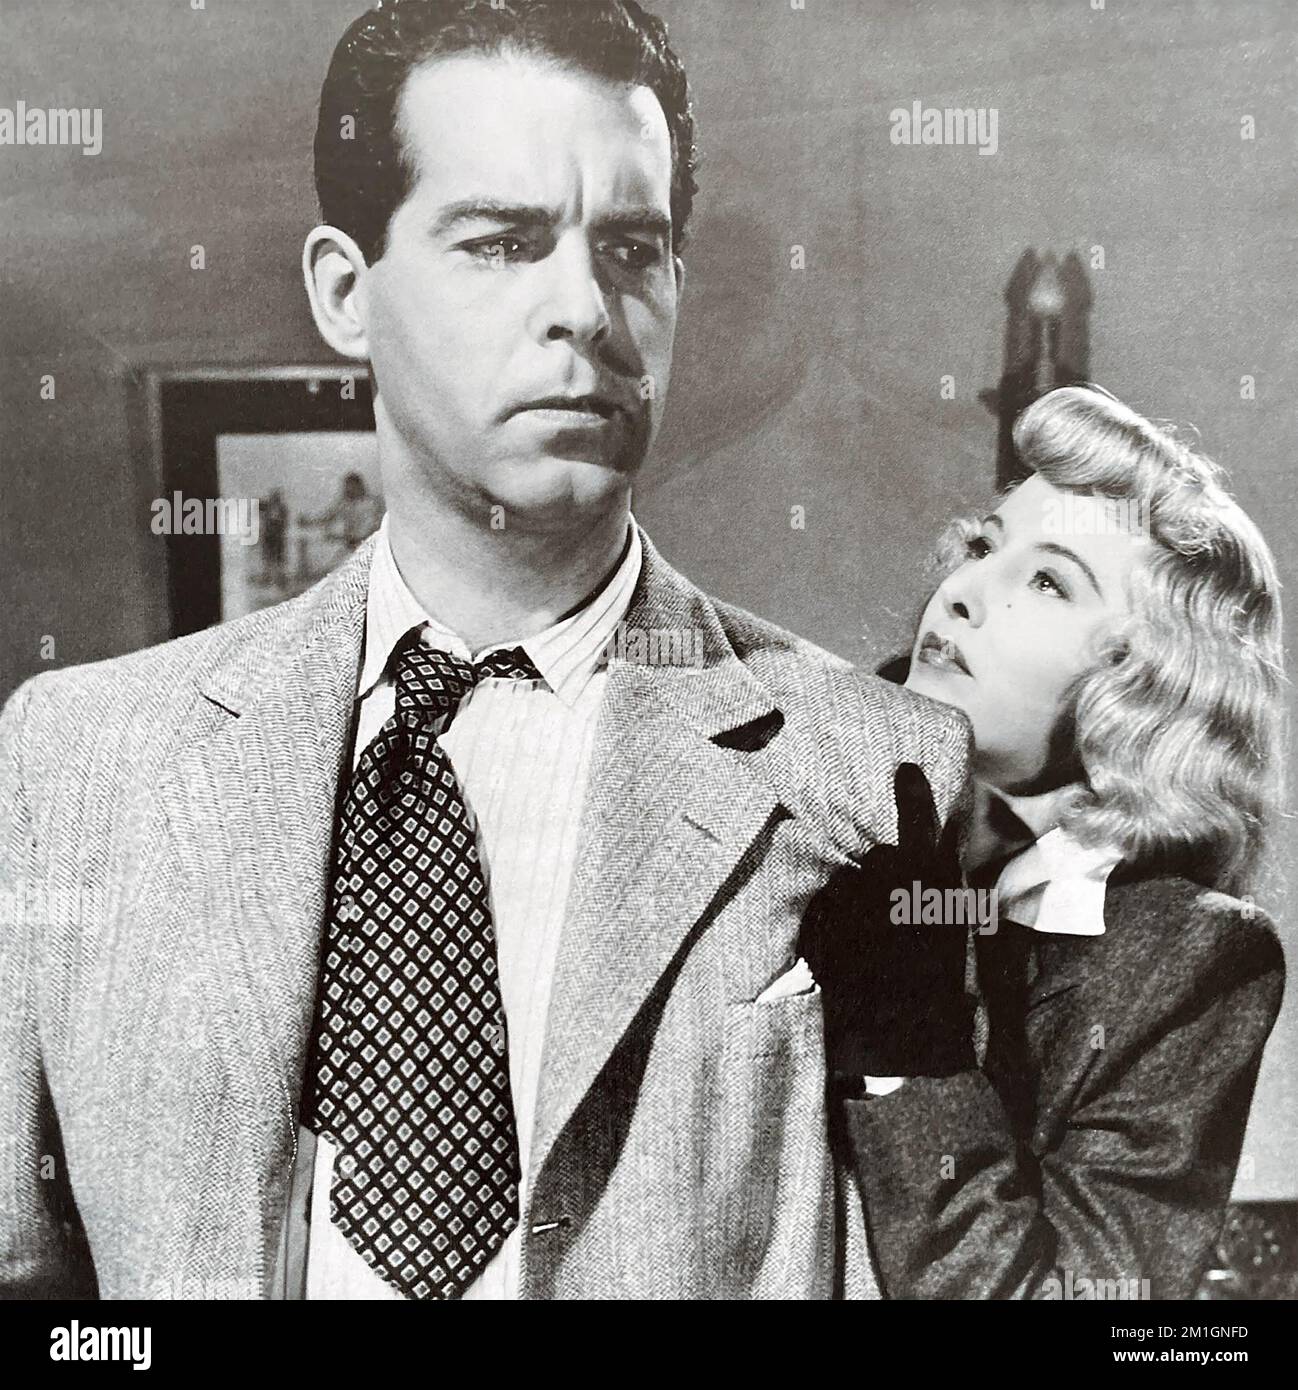 DOUBLE INDEMNITÉ 1944 Paramount Pictures film avec Barbara Stanwyck et Fred MacMurray Banque D'Images